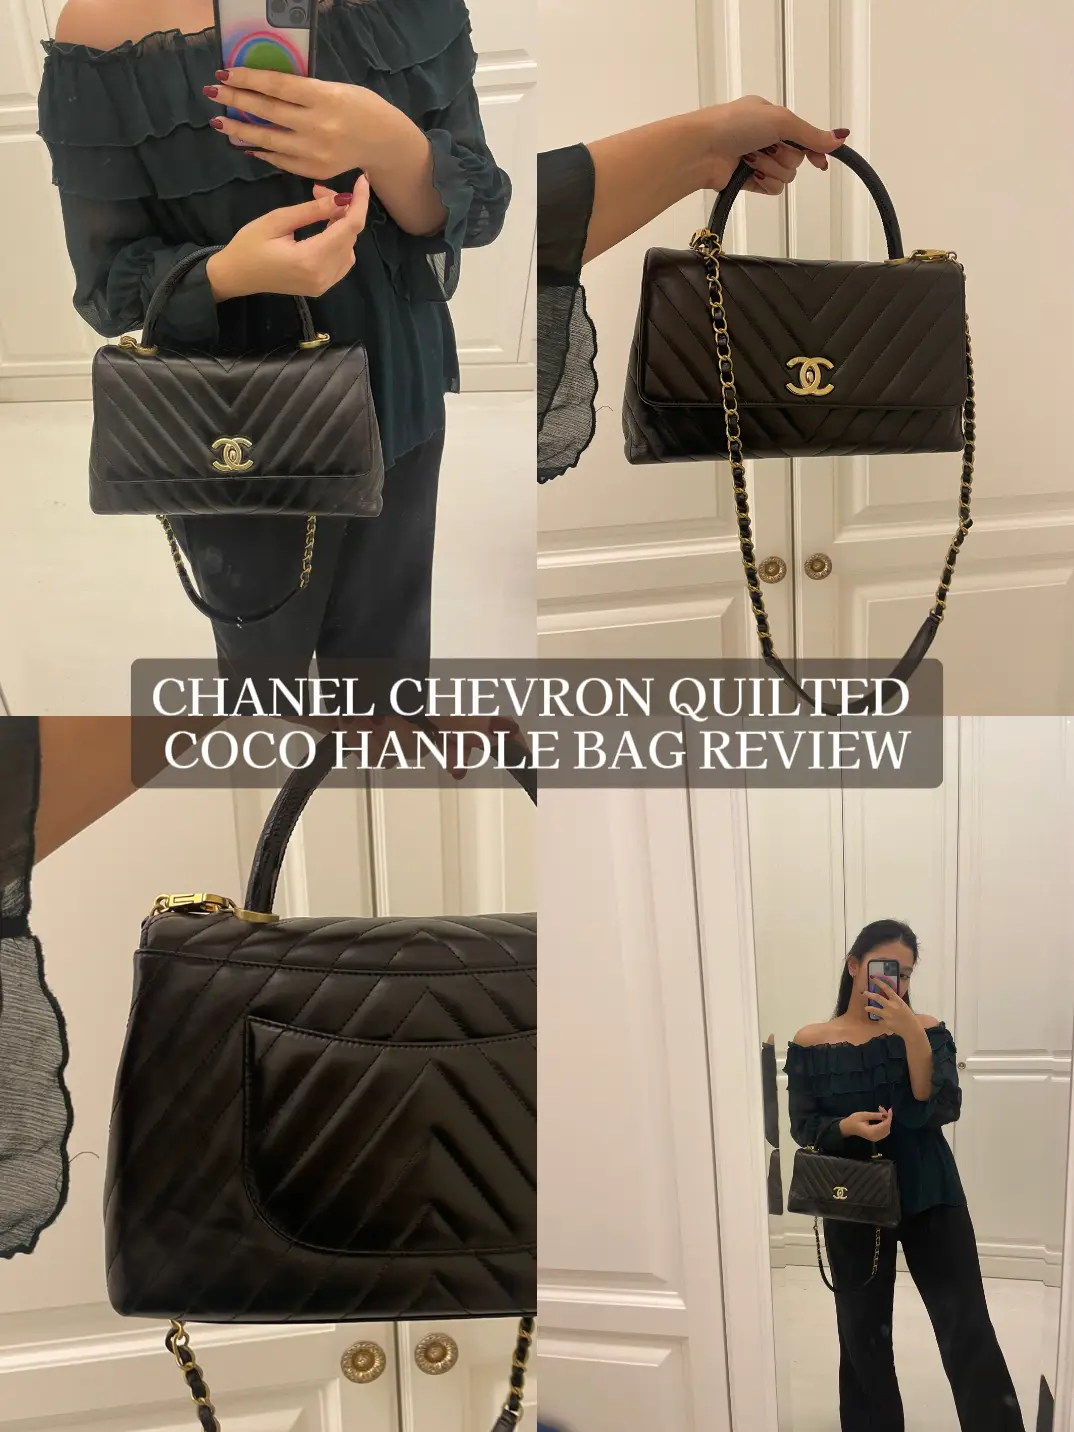 Chanel Chevron Quilted Caviar Coco Handle Flap